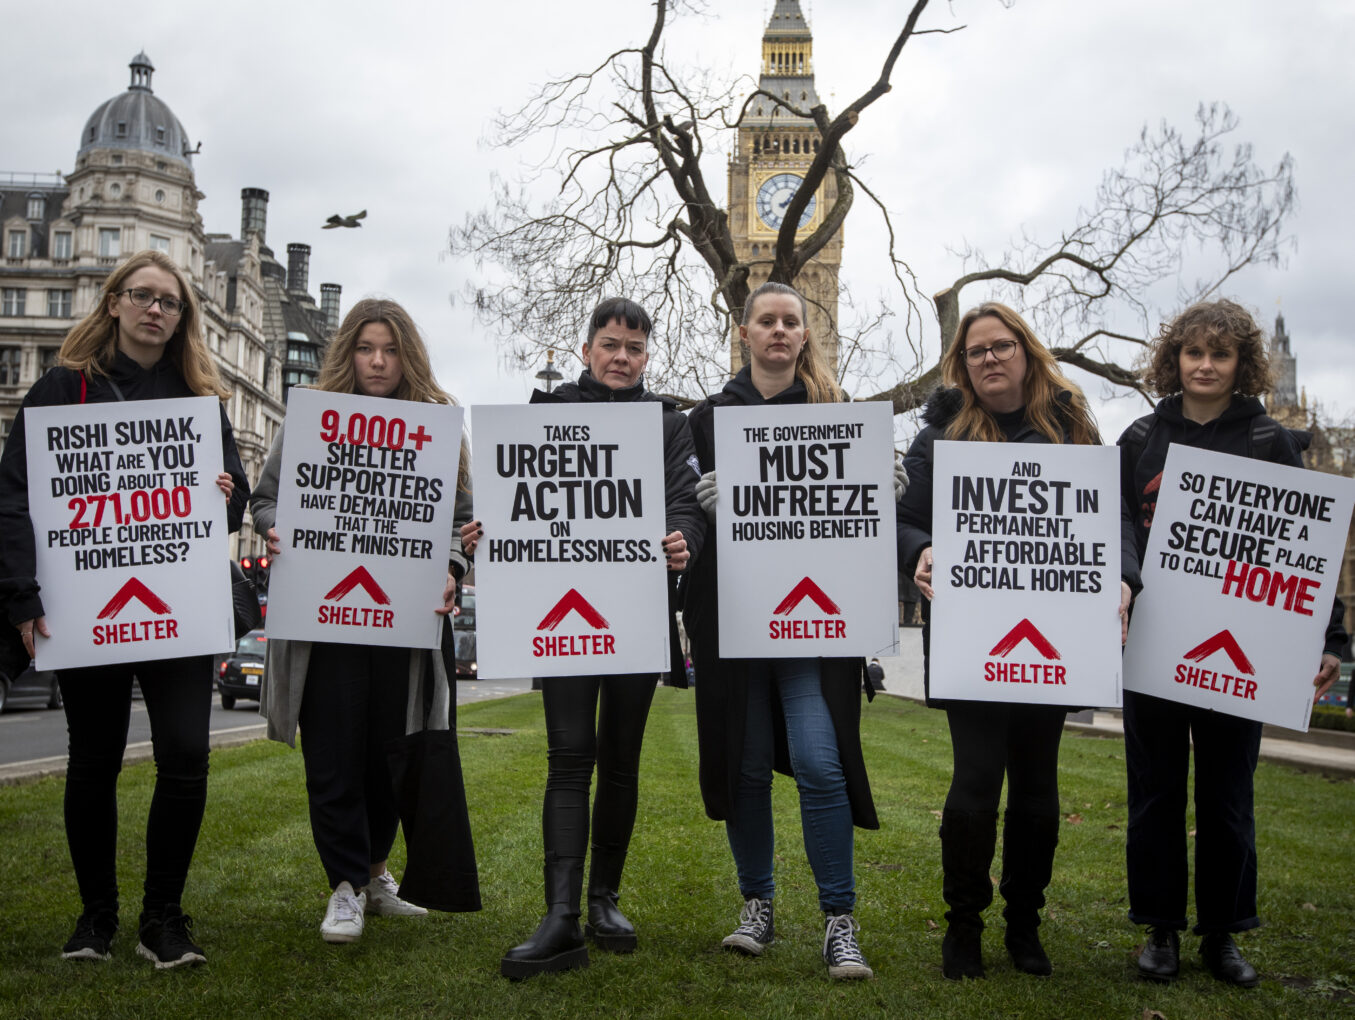 The chancellor failed to protect struggling renters from homelessness again after latest budget announcement